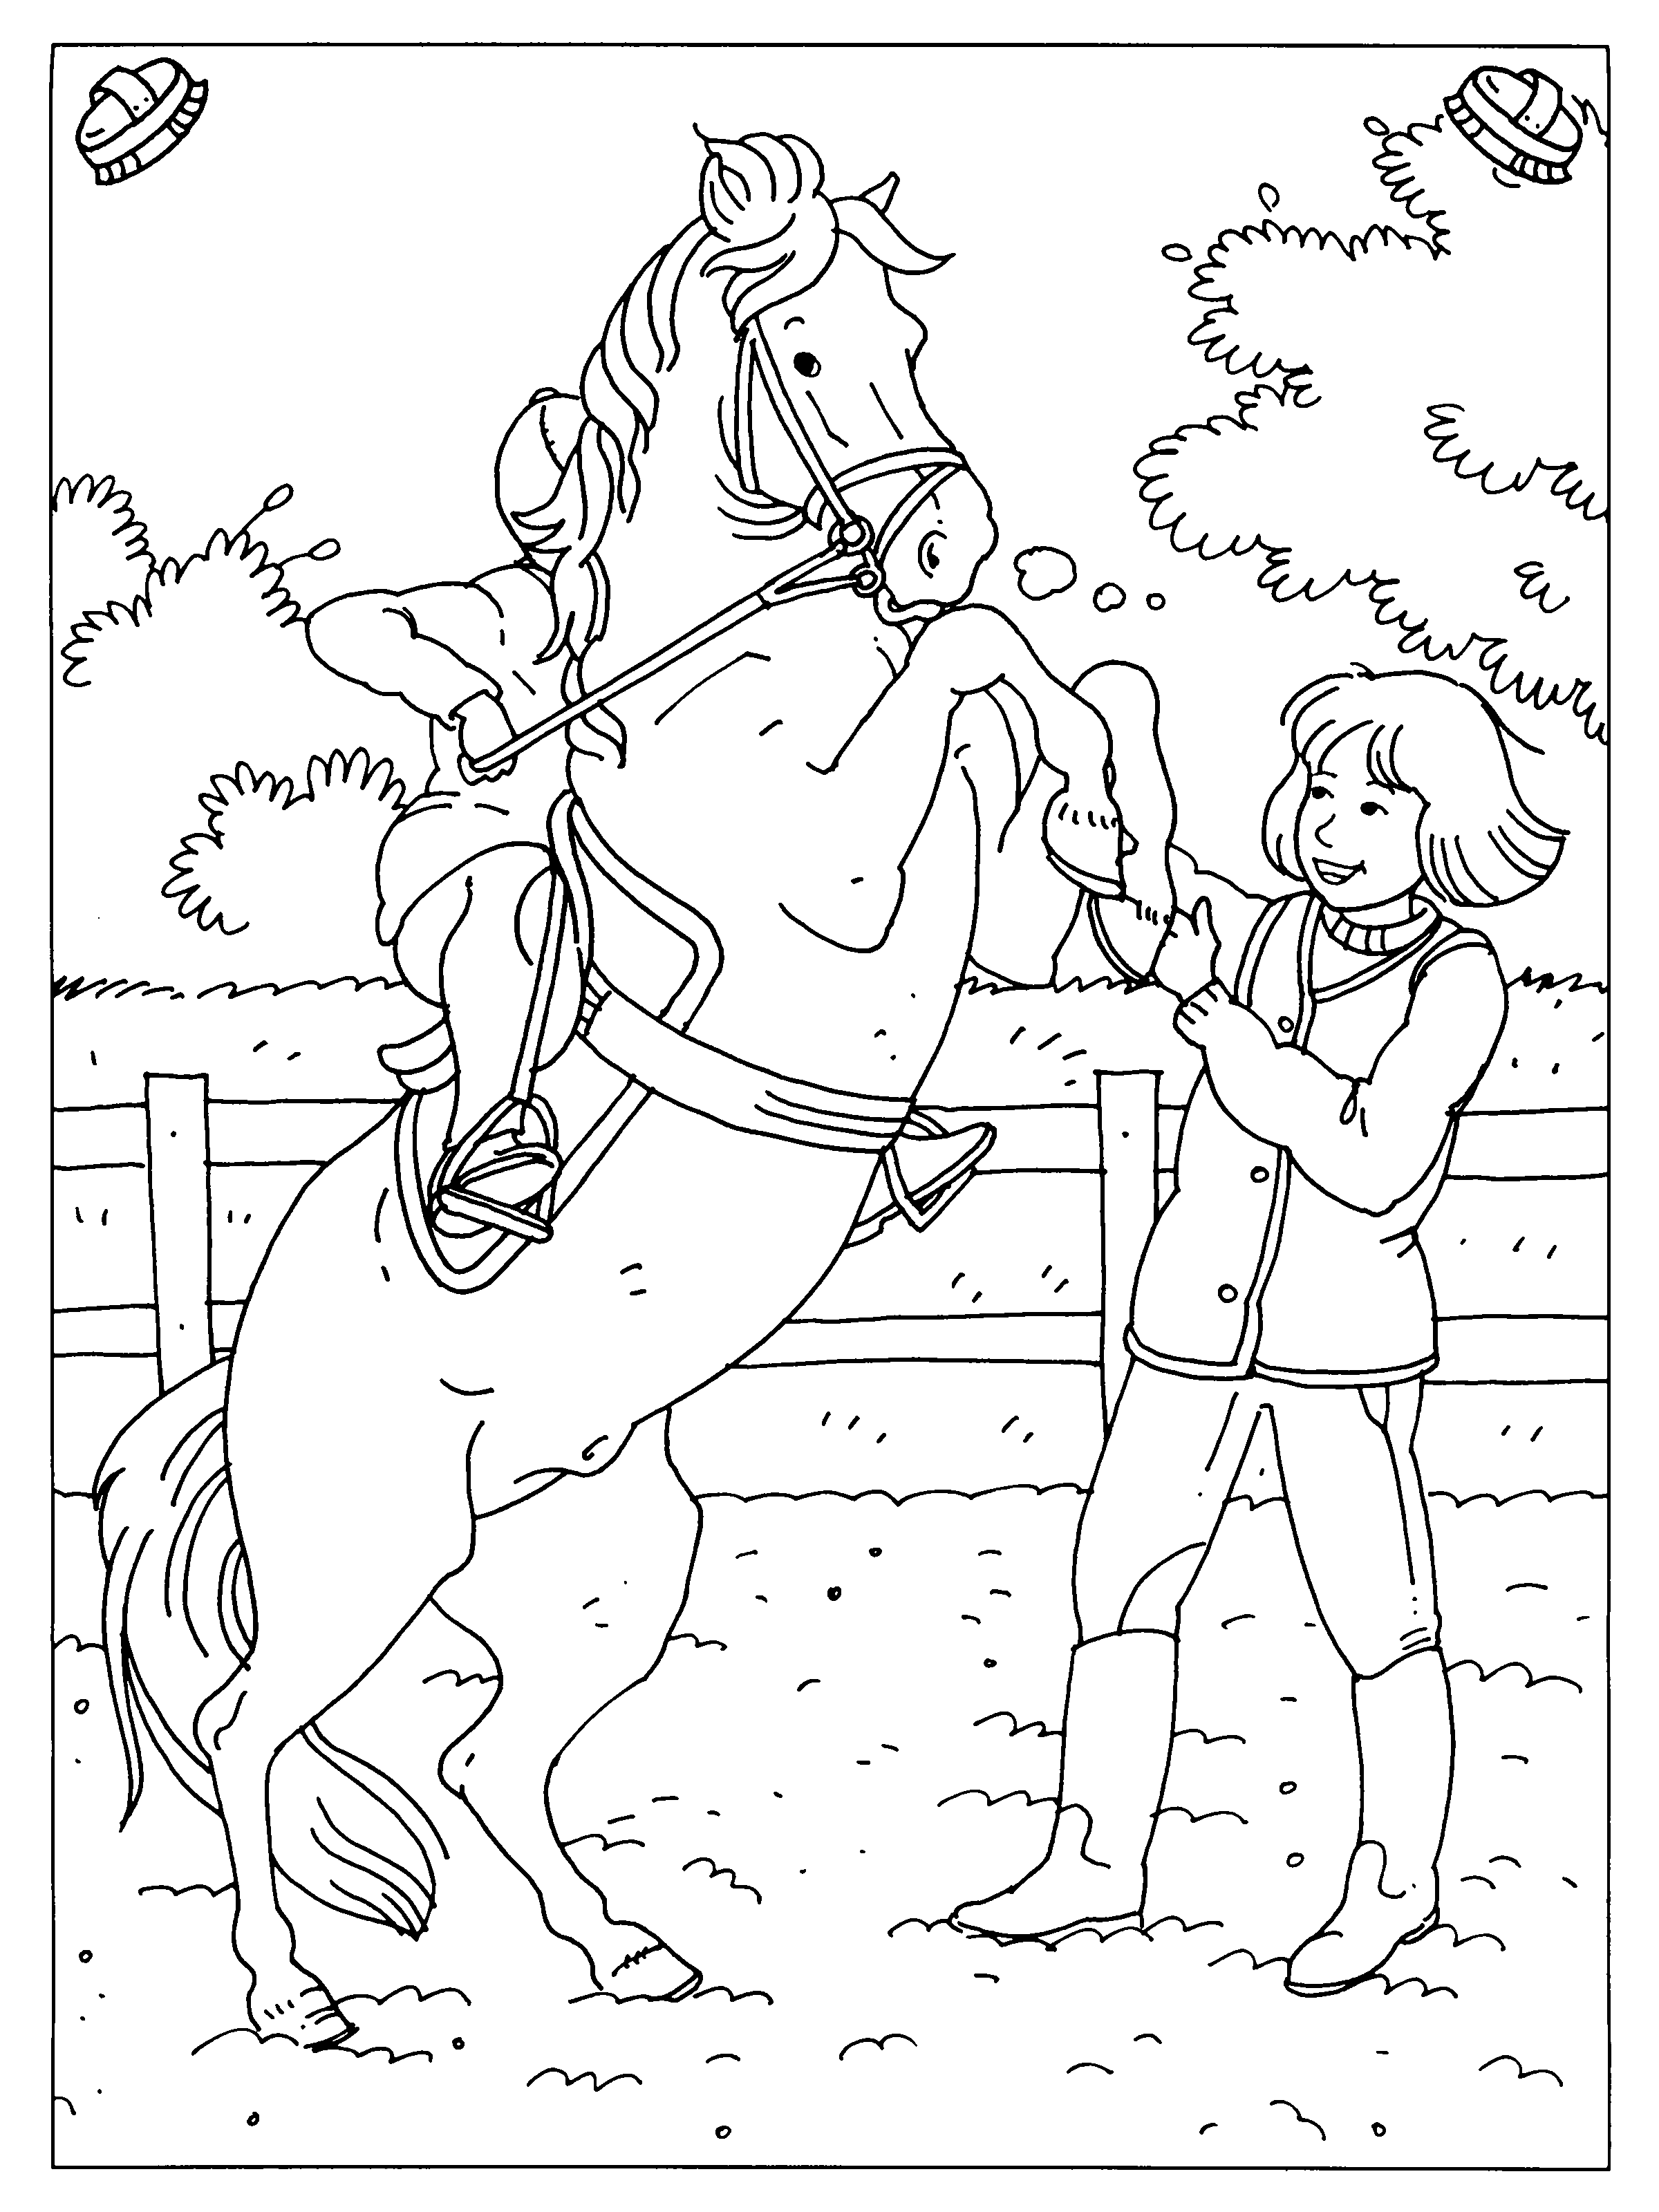 Paard 01 16 Png 2400 3200 Horse Coloring Pages Horse Coloring Coloring Books